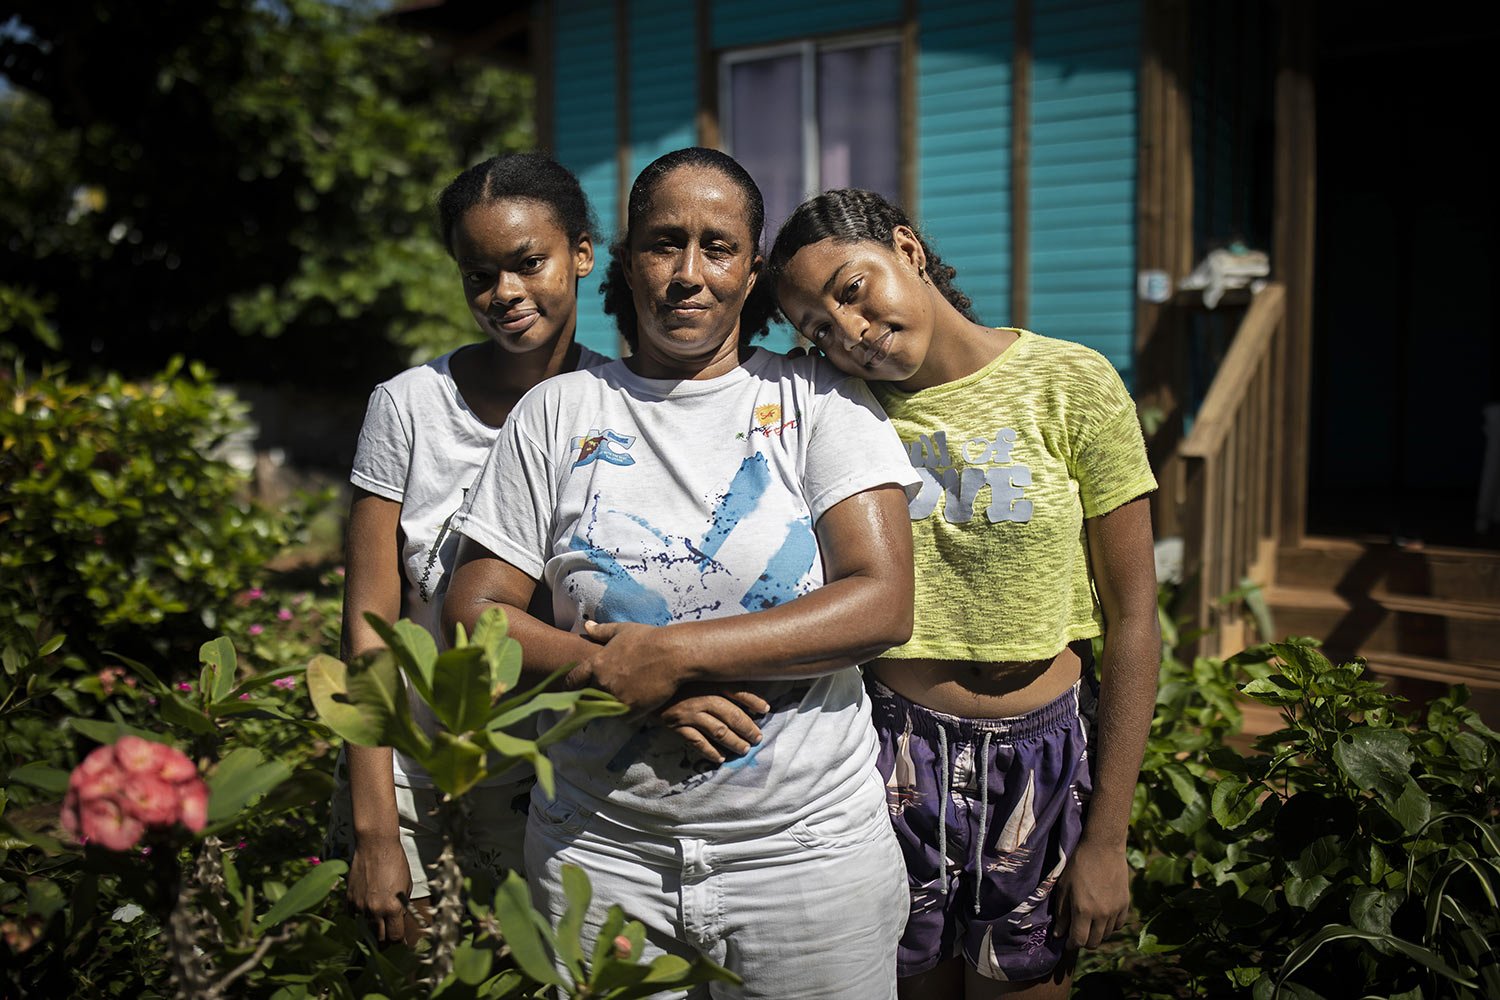  Jockey Leadid de la Cruz, center, poses for photos with her daughters, Sheileanojm, right, and Kissandra Dawkings, on San Andres Island in Colombia, Saturday, Nov. 12, 2022. (AP Photo/Ivan Valencia) 